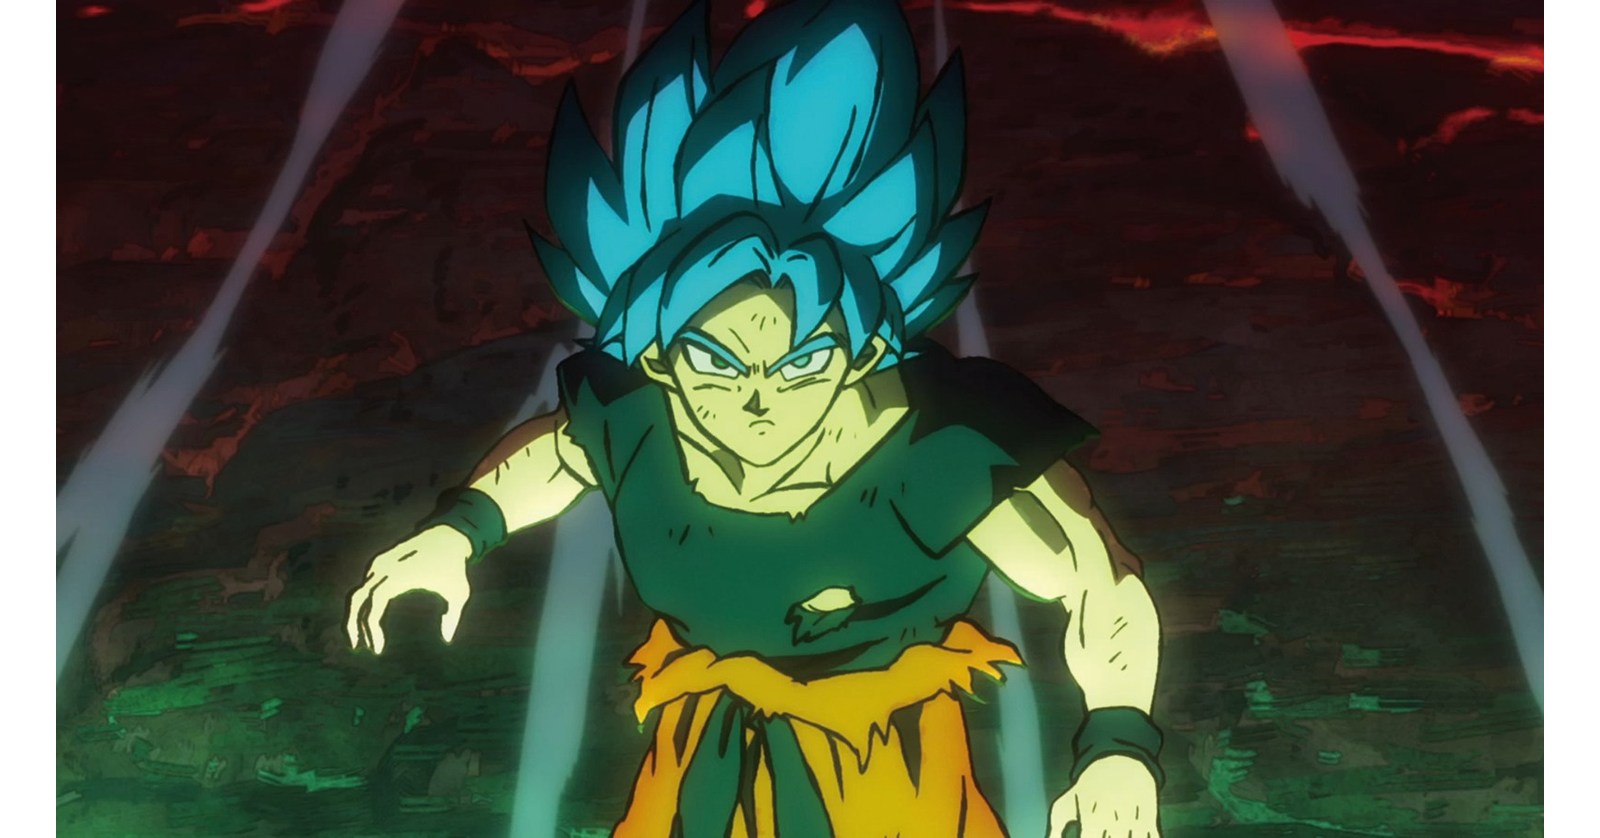  Dragon Ball Super : Broly - The Movie : Various